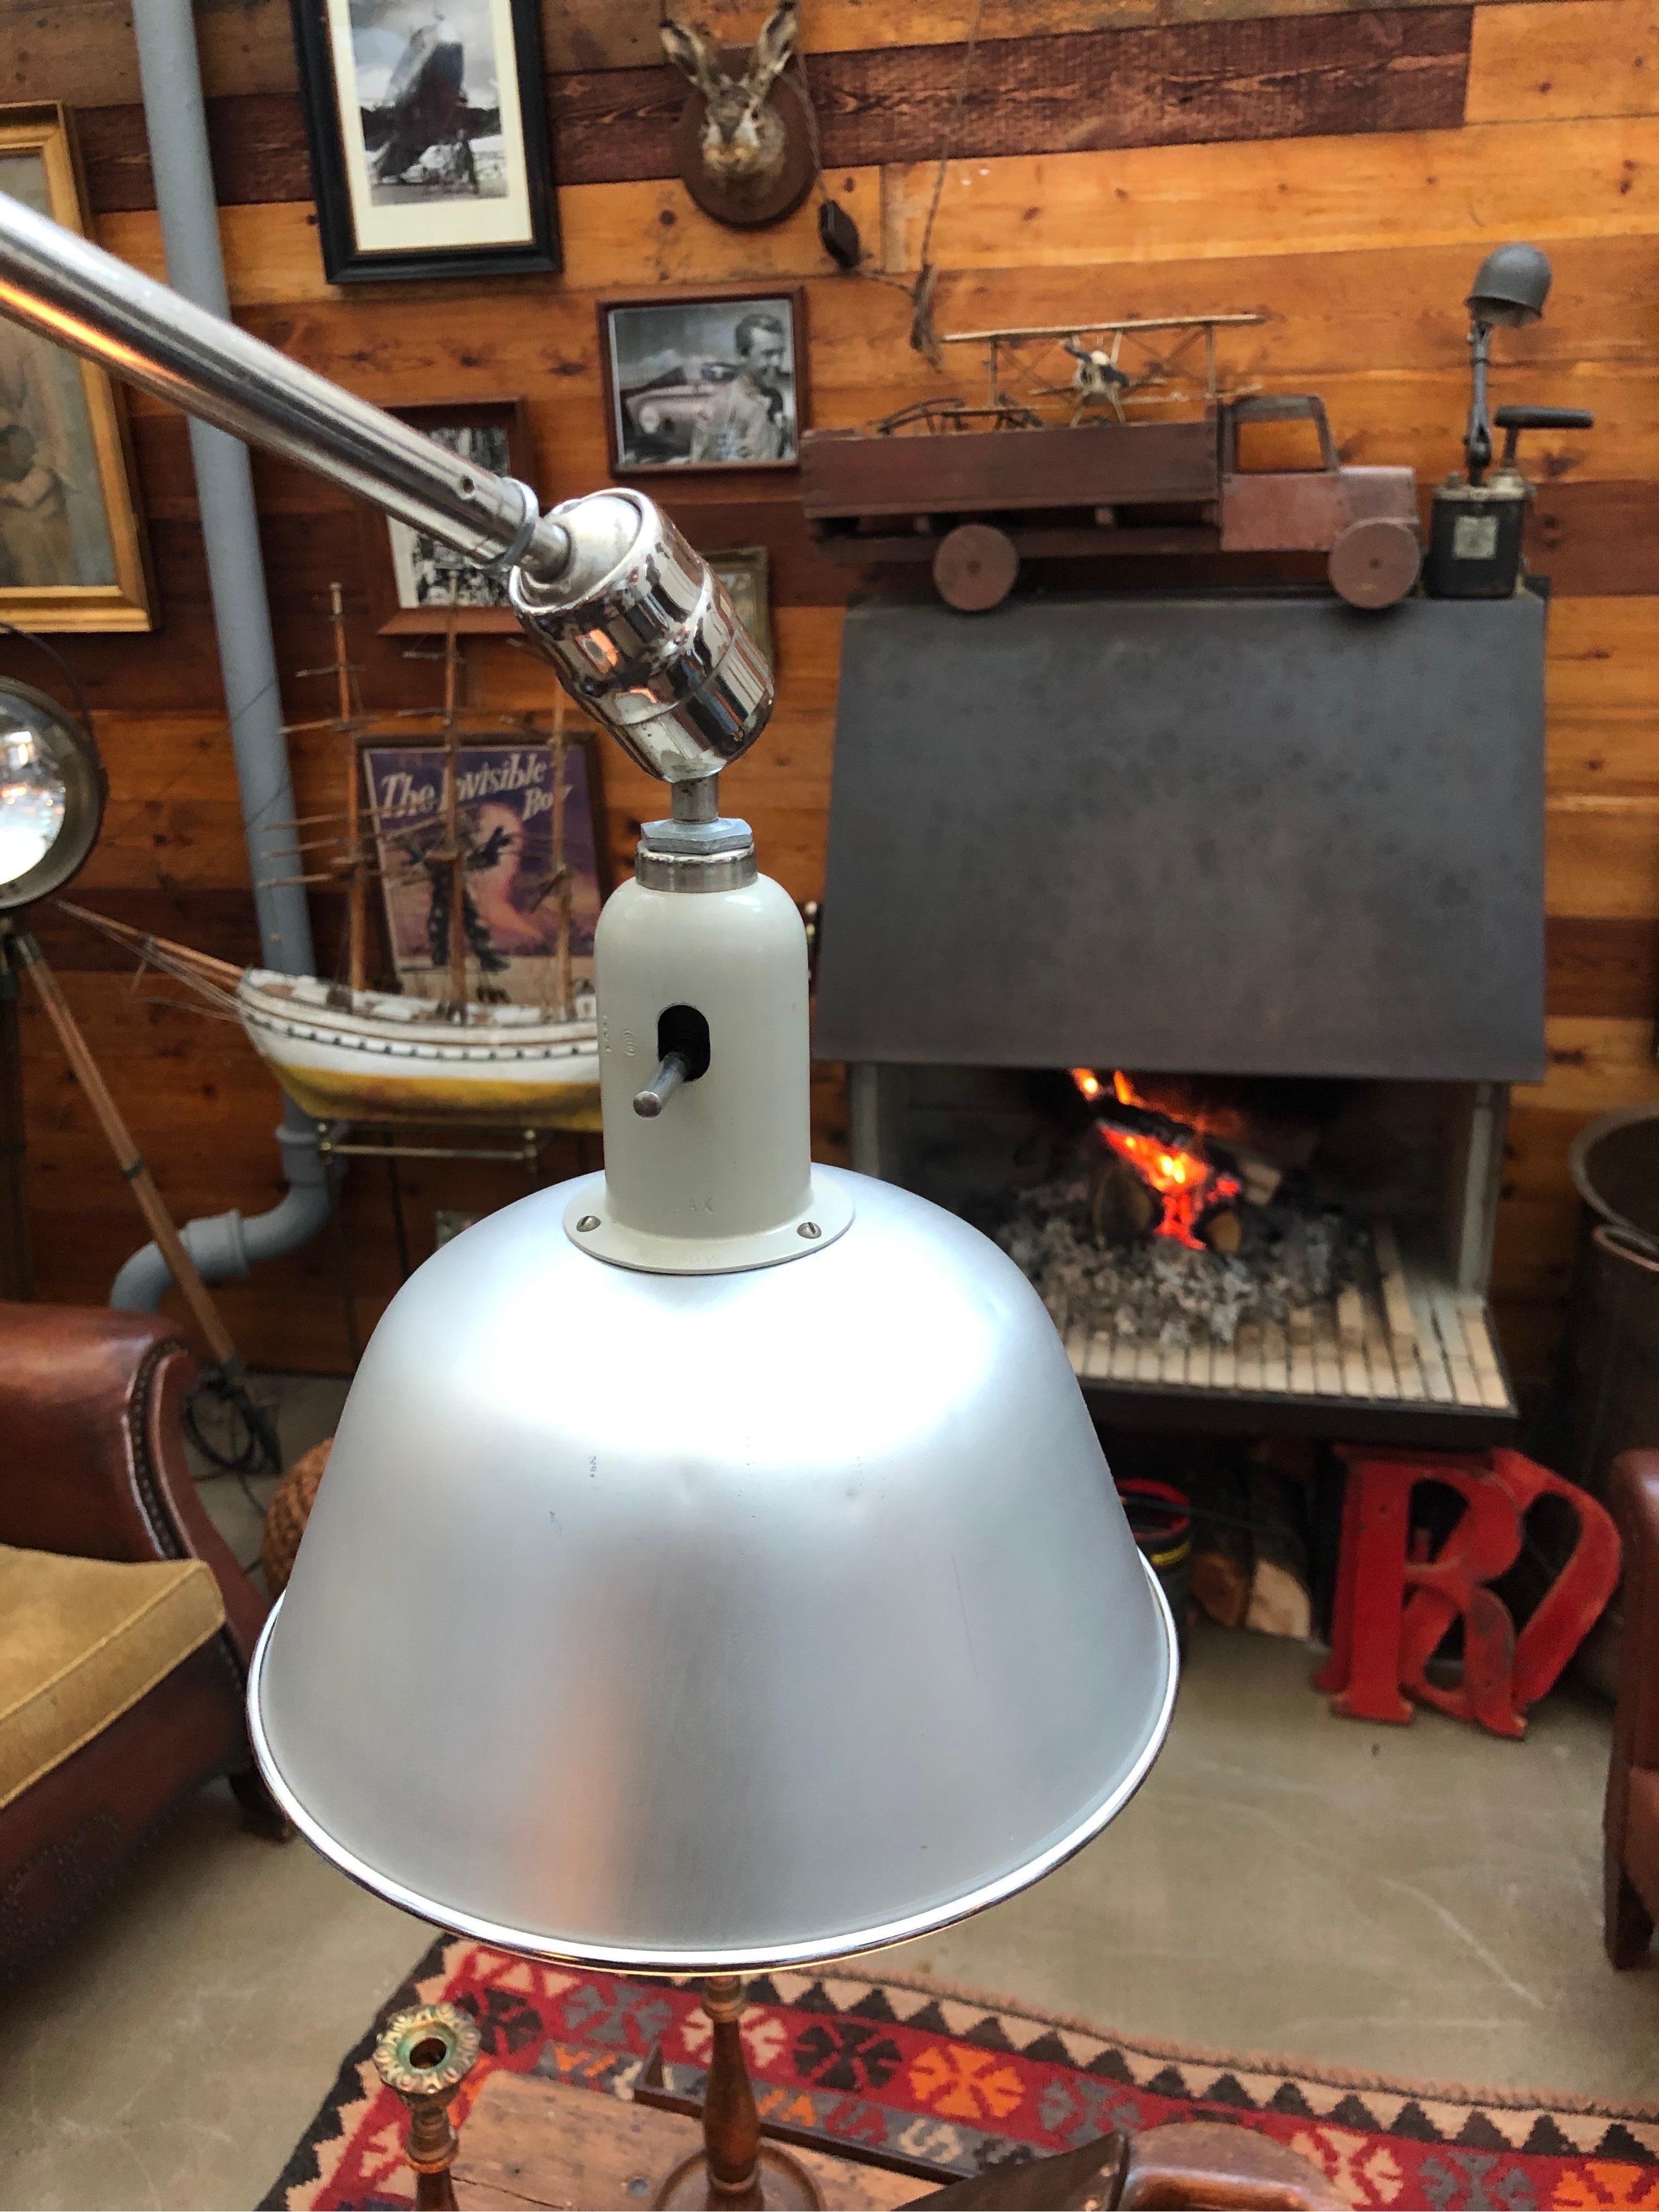 Classic vintage triplex telescopic work lamp designed by Johan Petter Johansson for ASEA of Sweden
One of the most versatile work lamps ever designed and also one of the most beautiful.
In original condition with age related west and patina but a